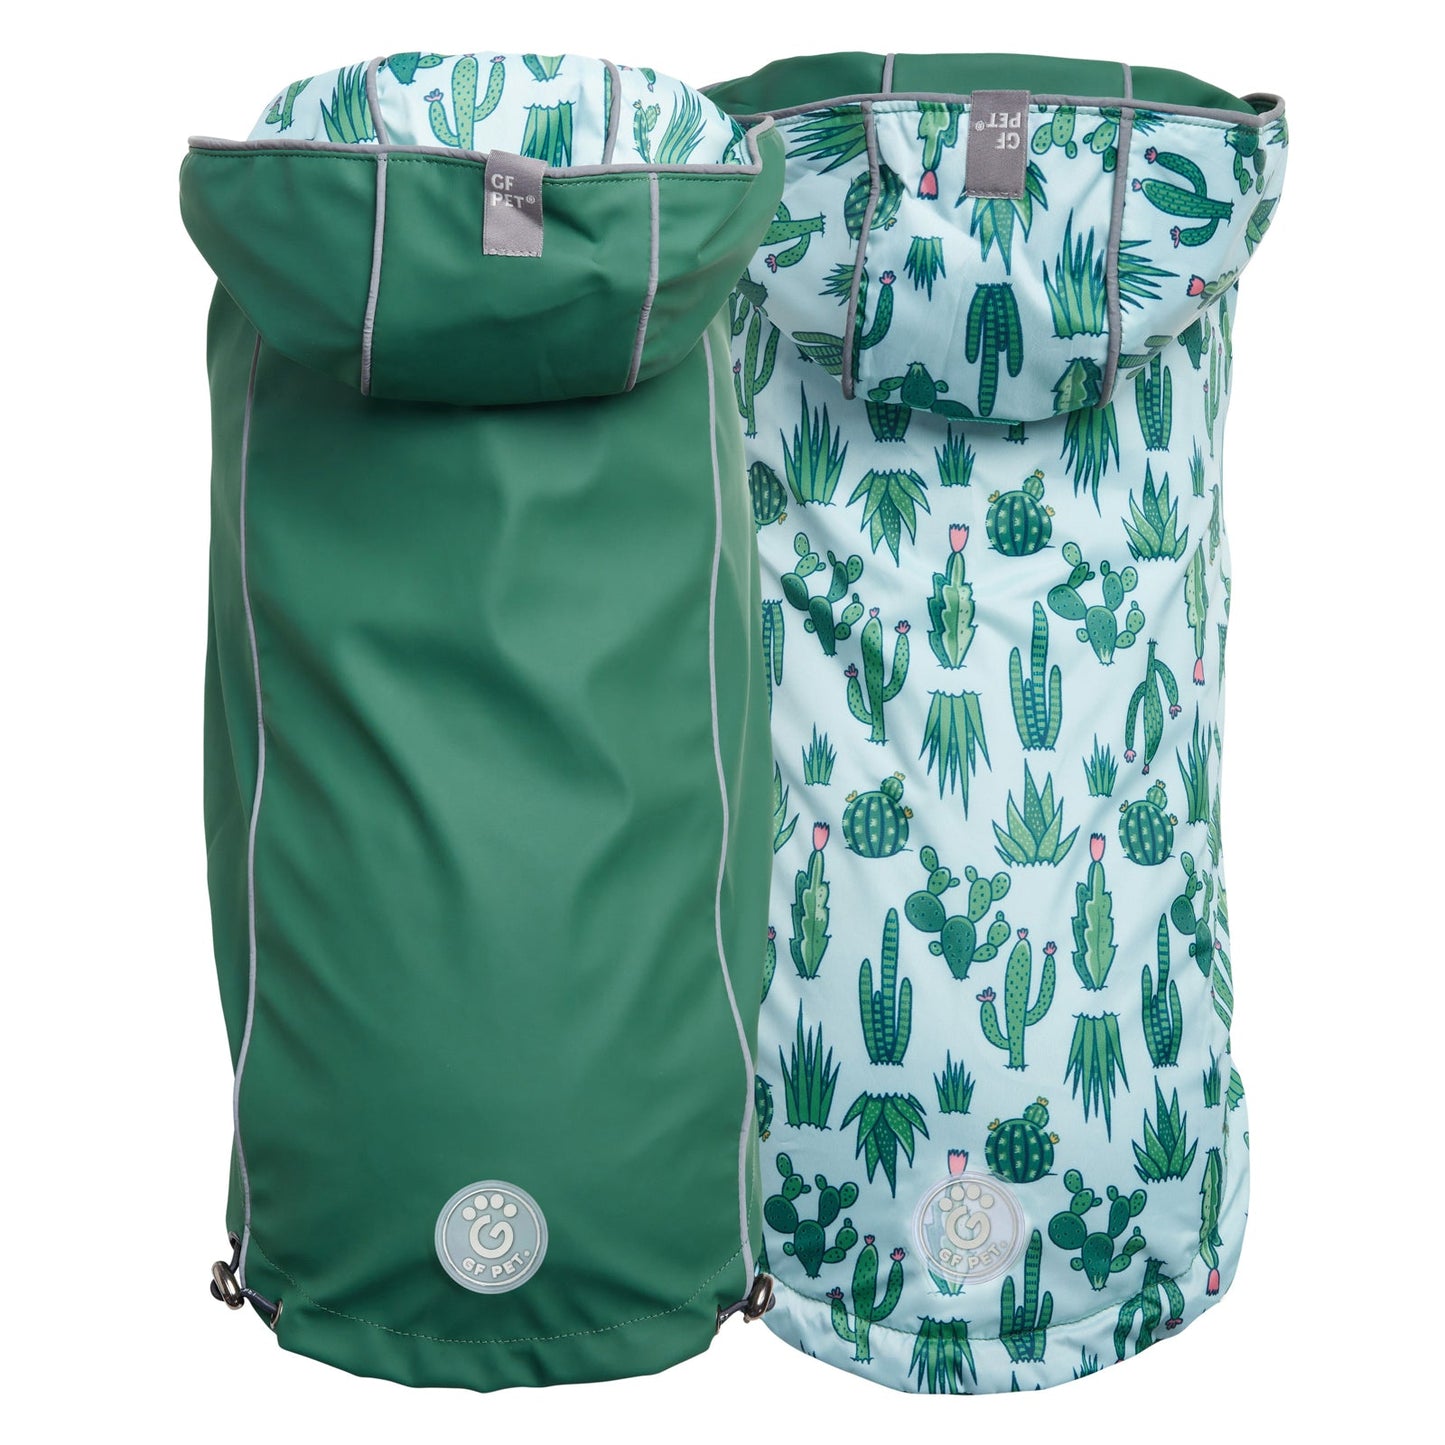 two views of a reversible raincoat for dogs. One shows the green side of the coat and the other shows the light blue with cactus print side of the coat